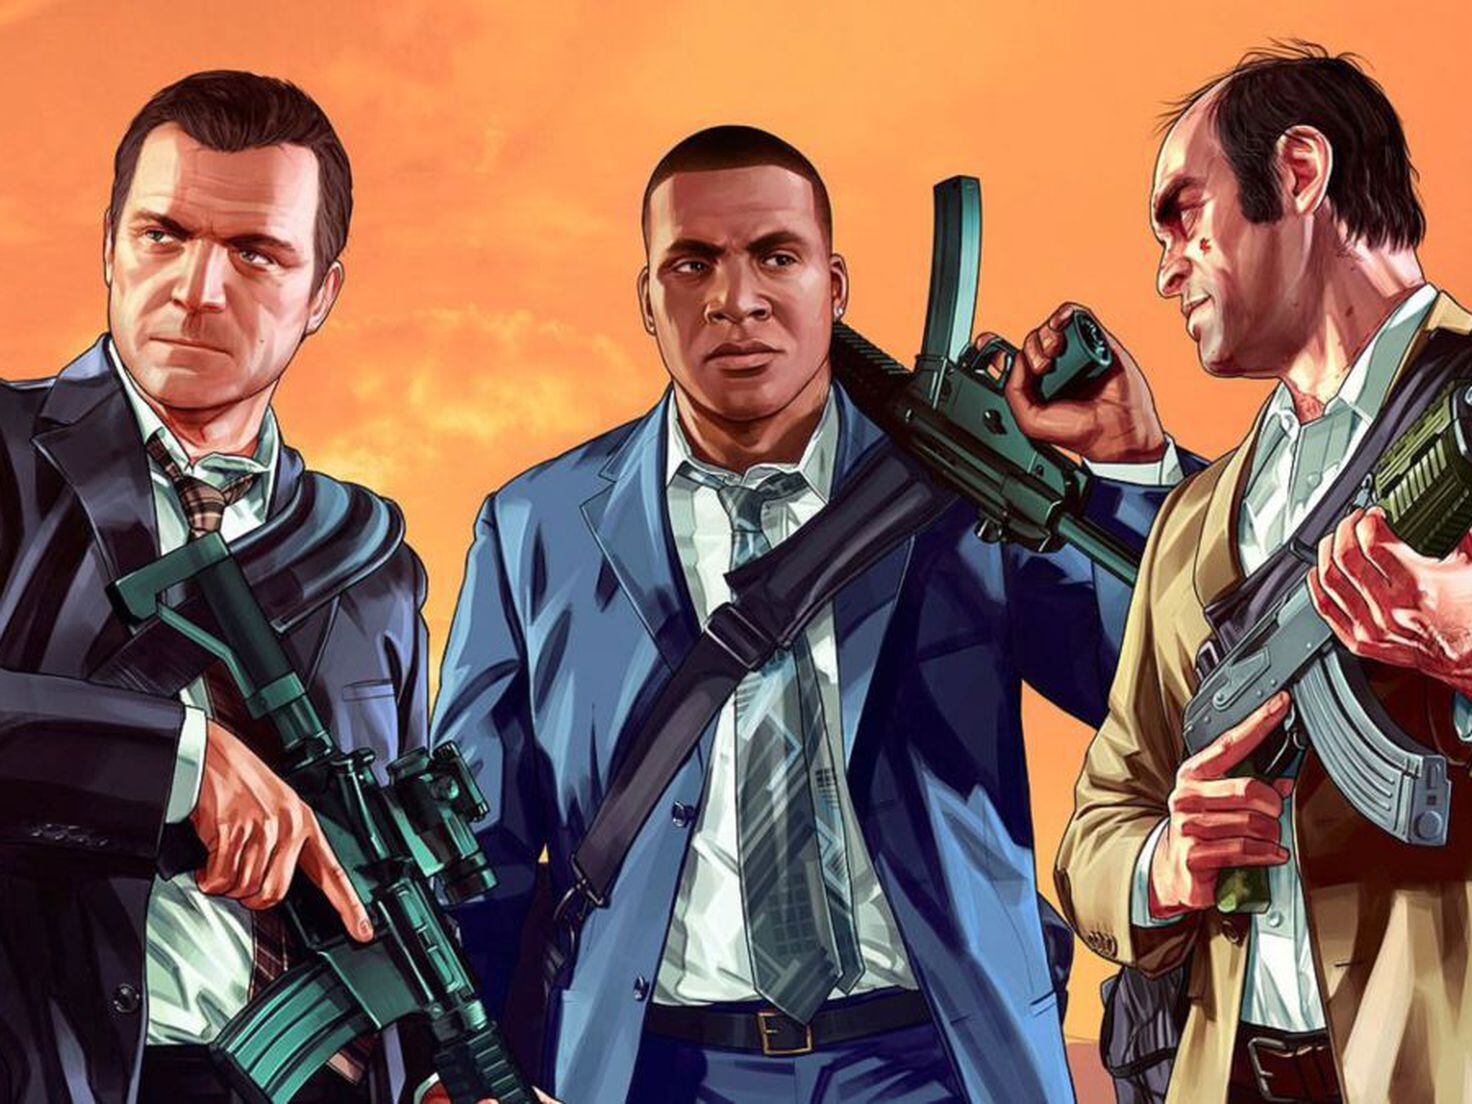 Grand Theft Auto VI: Take-Two CEO confirms the release of 'several